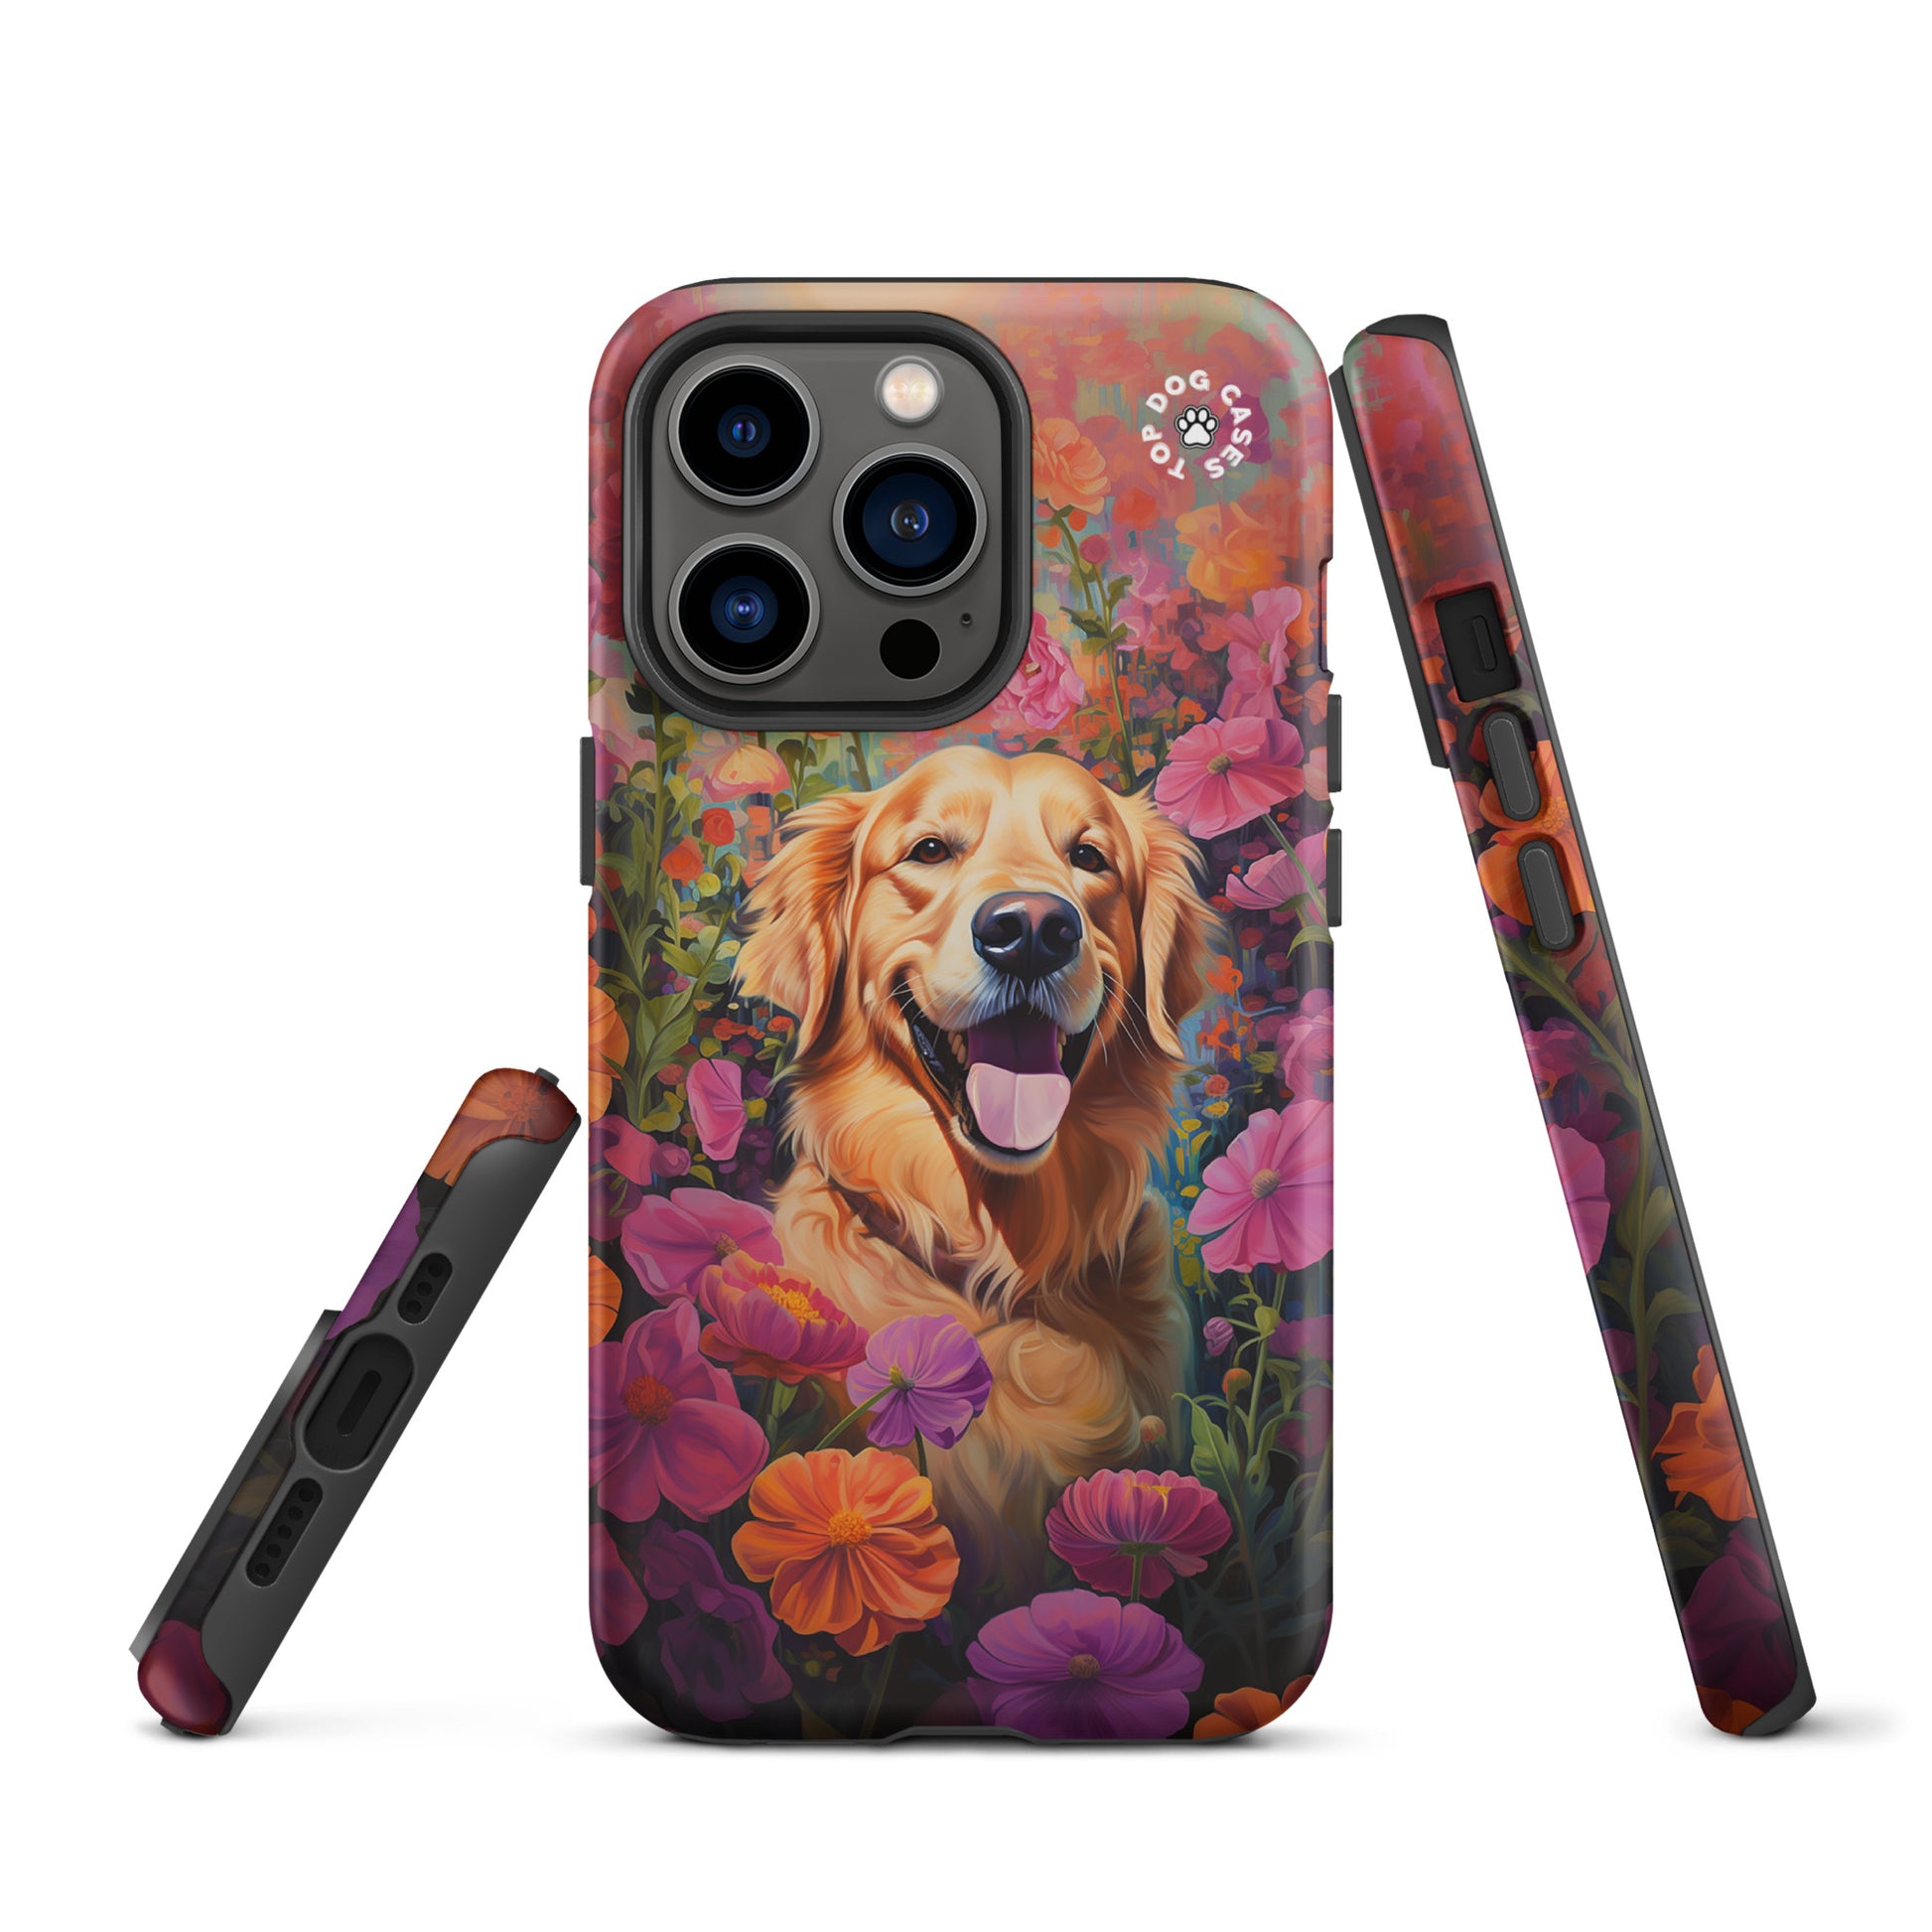 Happy Golden Retriever Around Flowers Tough Case for iPhone - Top Dog Cases - #CuteDog, #CuteDogs, #DogsAndFlowers, #Golden Retriever, #GoldenRetrieverCase, #HappyDog, #iPhone, #iPhone11, #iphone11case, #iPhone12, #iPhone12case, #iPhone13, #iPhone13case, #iPhone13DogCase, #iPhone13Mini, #iPhone13Pro, #iPhone13ProMax, #iPhone14, #iPhone14case, #iPhone14DogCase, #iPhone14Plus, #iPhone14Pluscase, #iPhone14Pro, #iPhone14ProMax, #iPhone14ProMaxCase, #iPhone15, #iPhone15case, #iPhonecase, #iphonedogcase